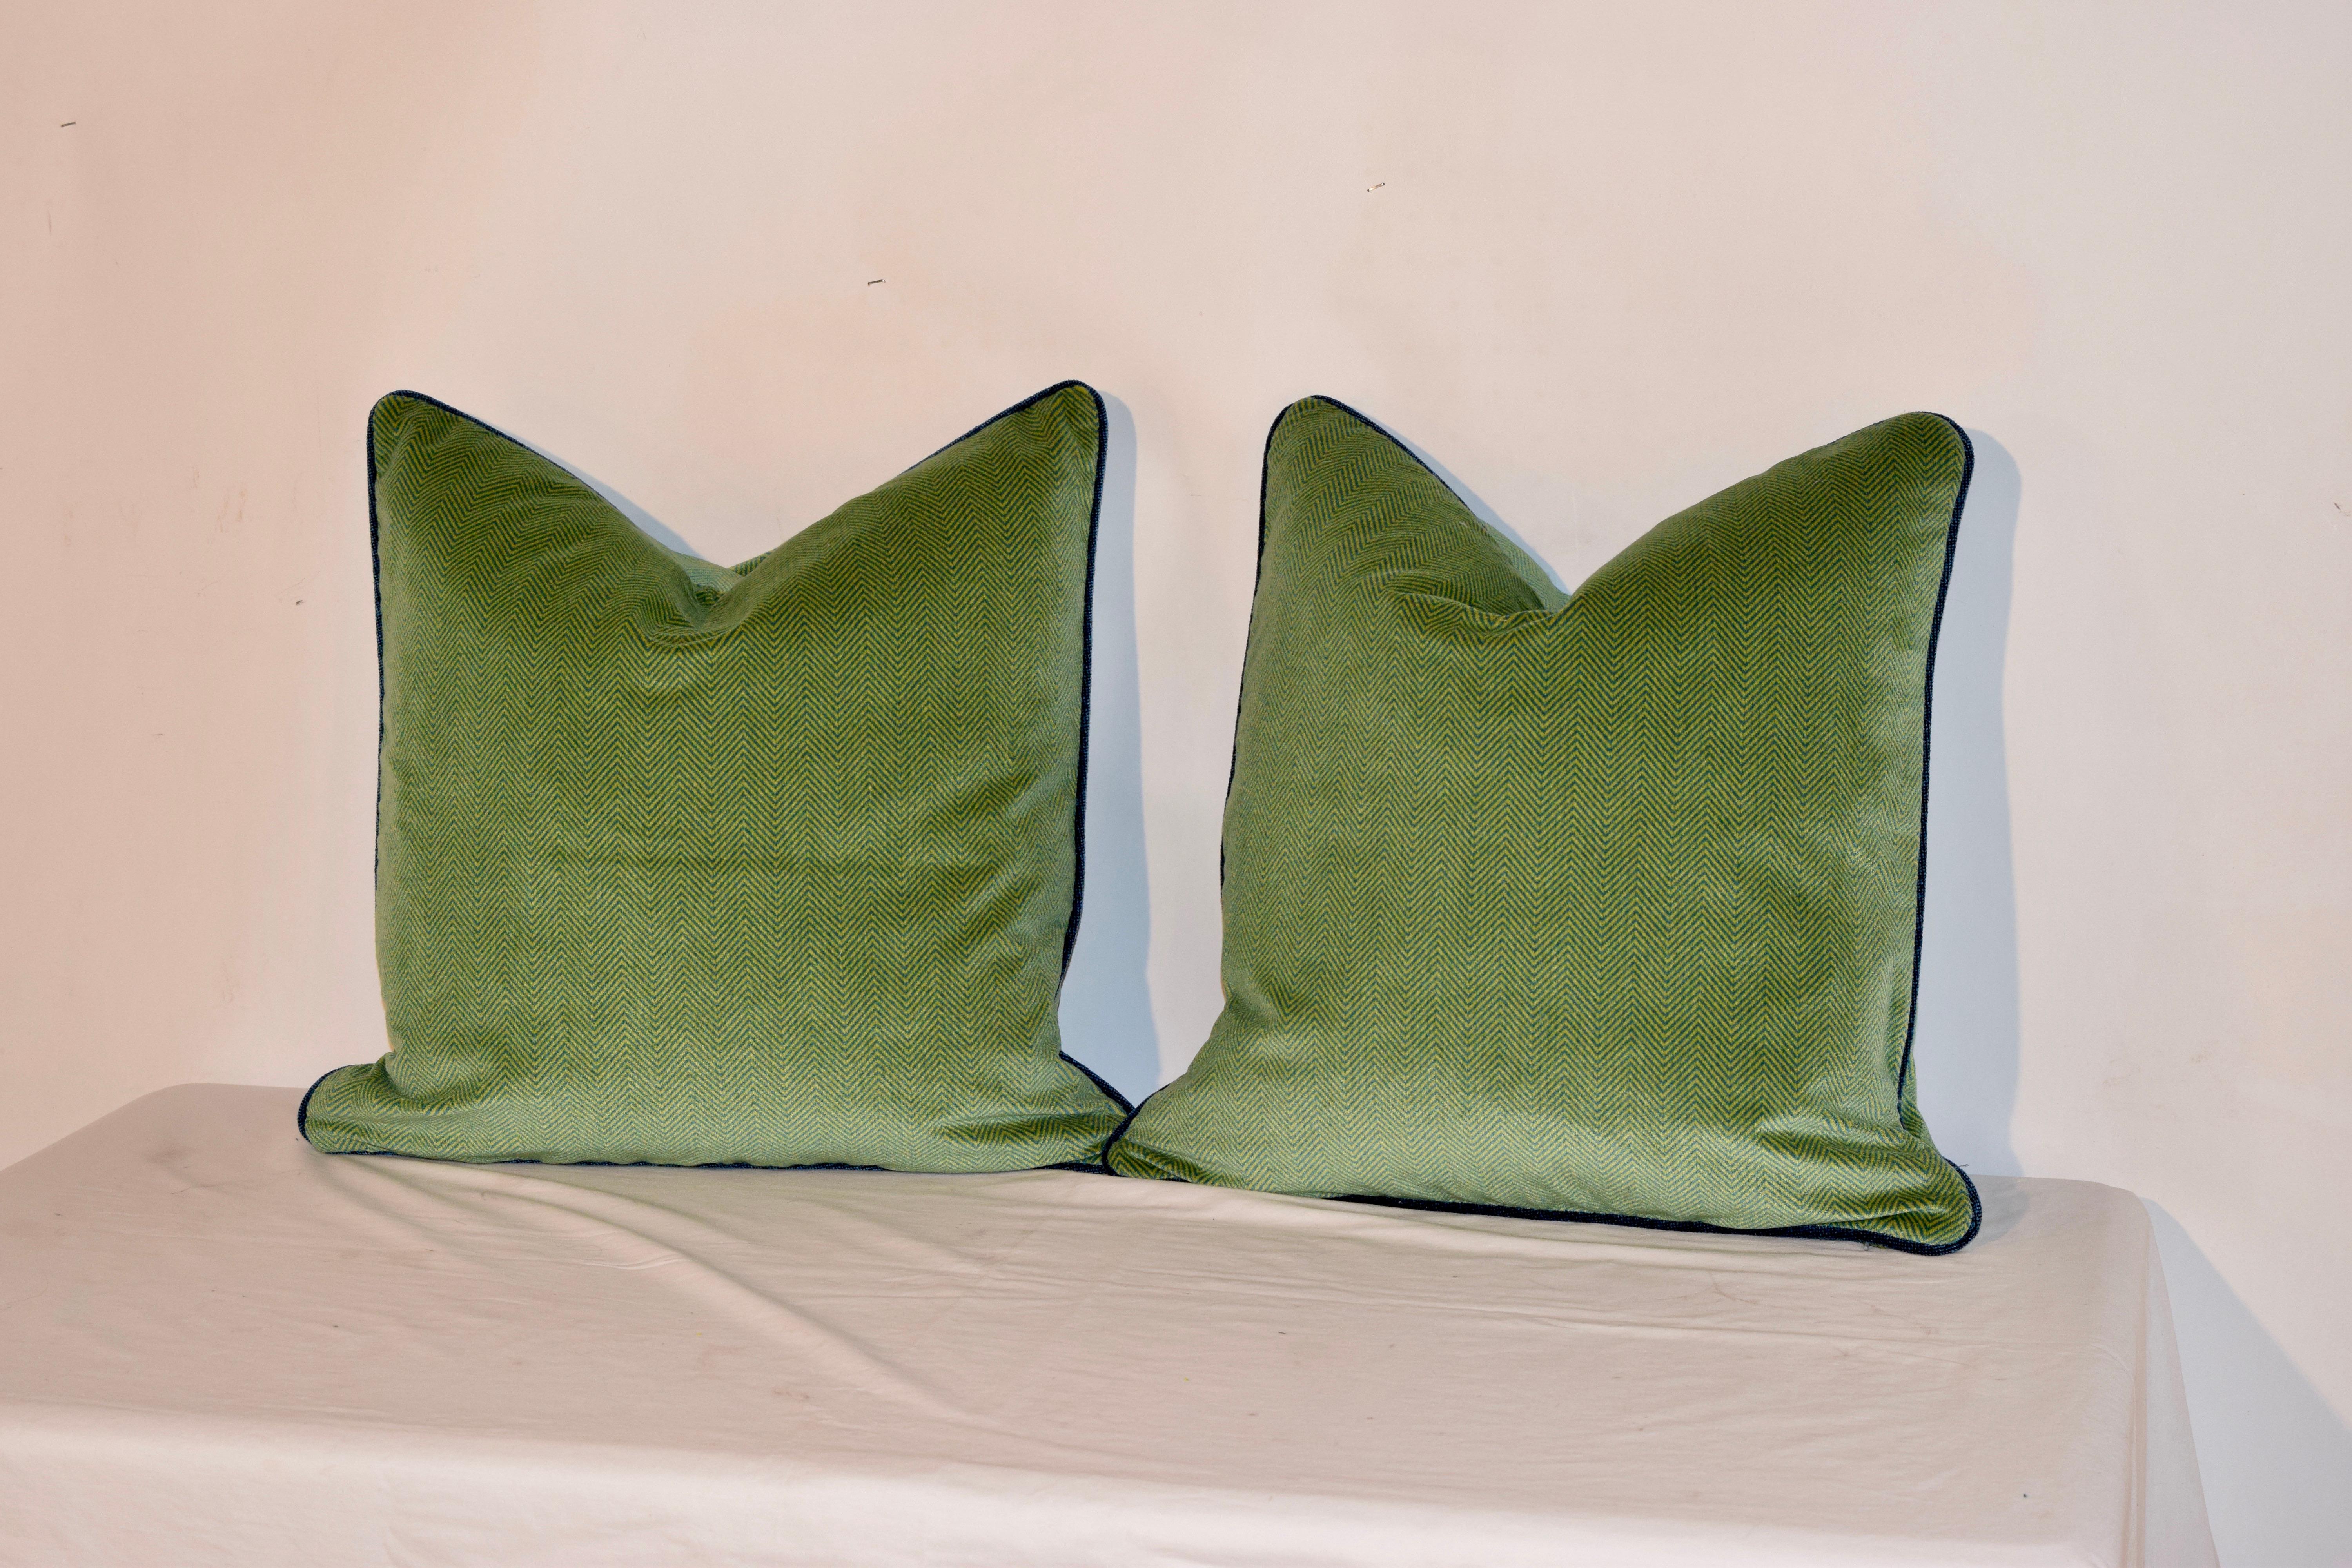 Hand sewn pillows in a blue and green herringbone pattern and contrasting blue velvet cording. Hidden zippers. Feather inserts are removable. Made in North Carolina.